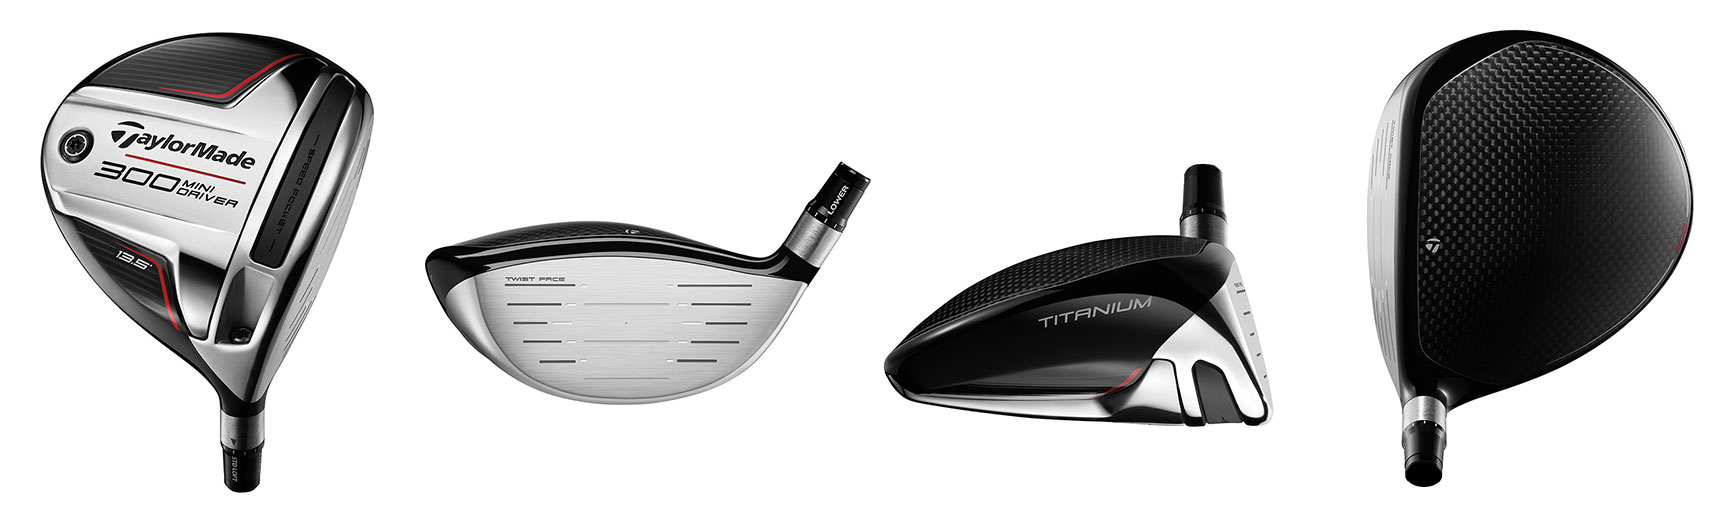 Taylormade 300 Mini Driver Profile Images